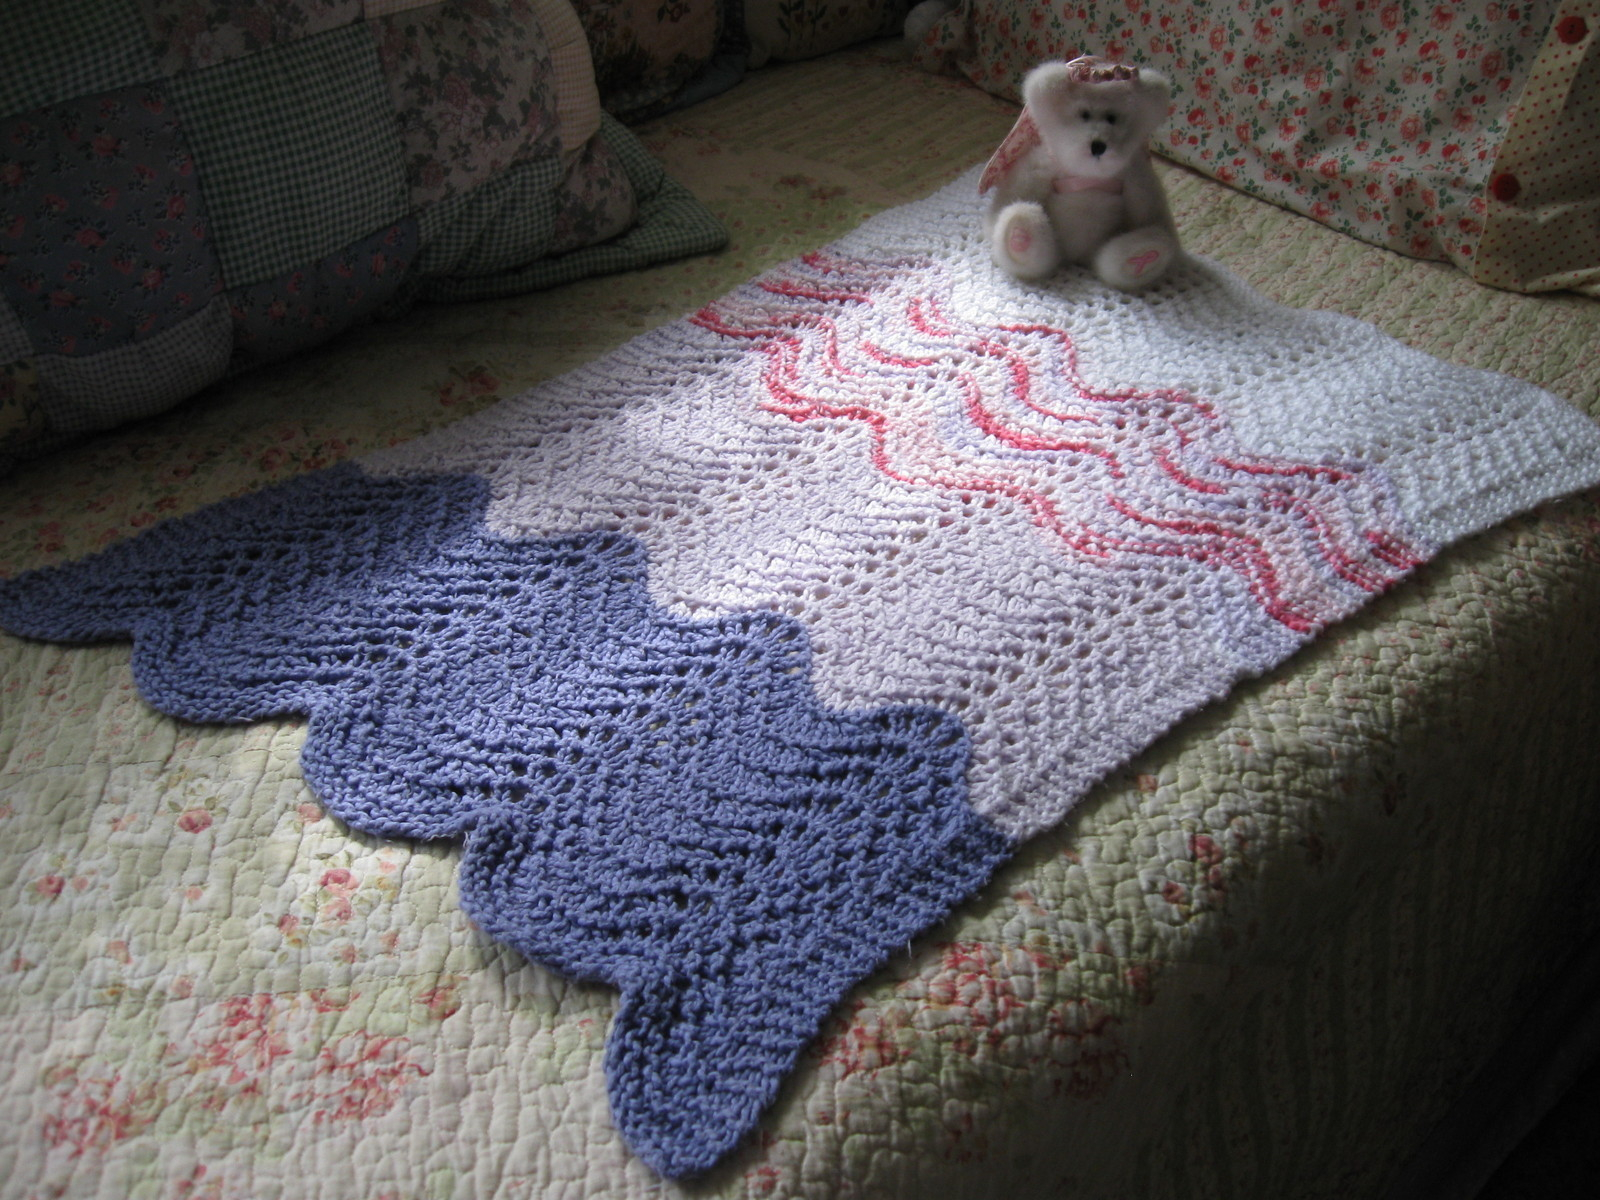 Car Seat Knitted Blanket Pattern Feather And Fan Ba Car Seat Blanket How To Make A Ba Blanket